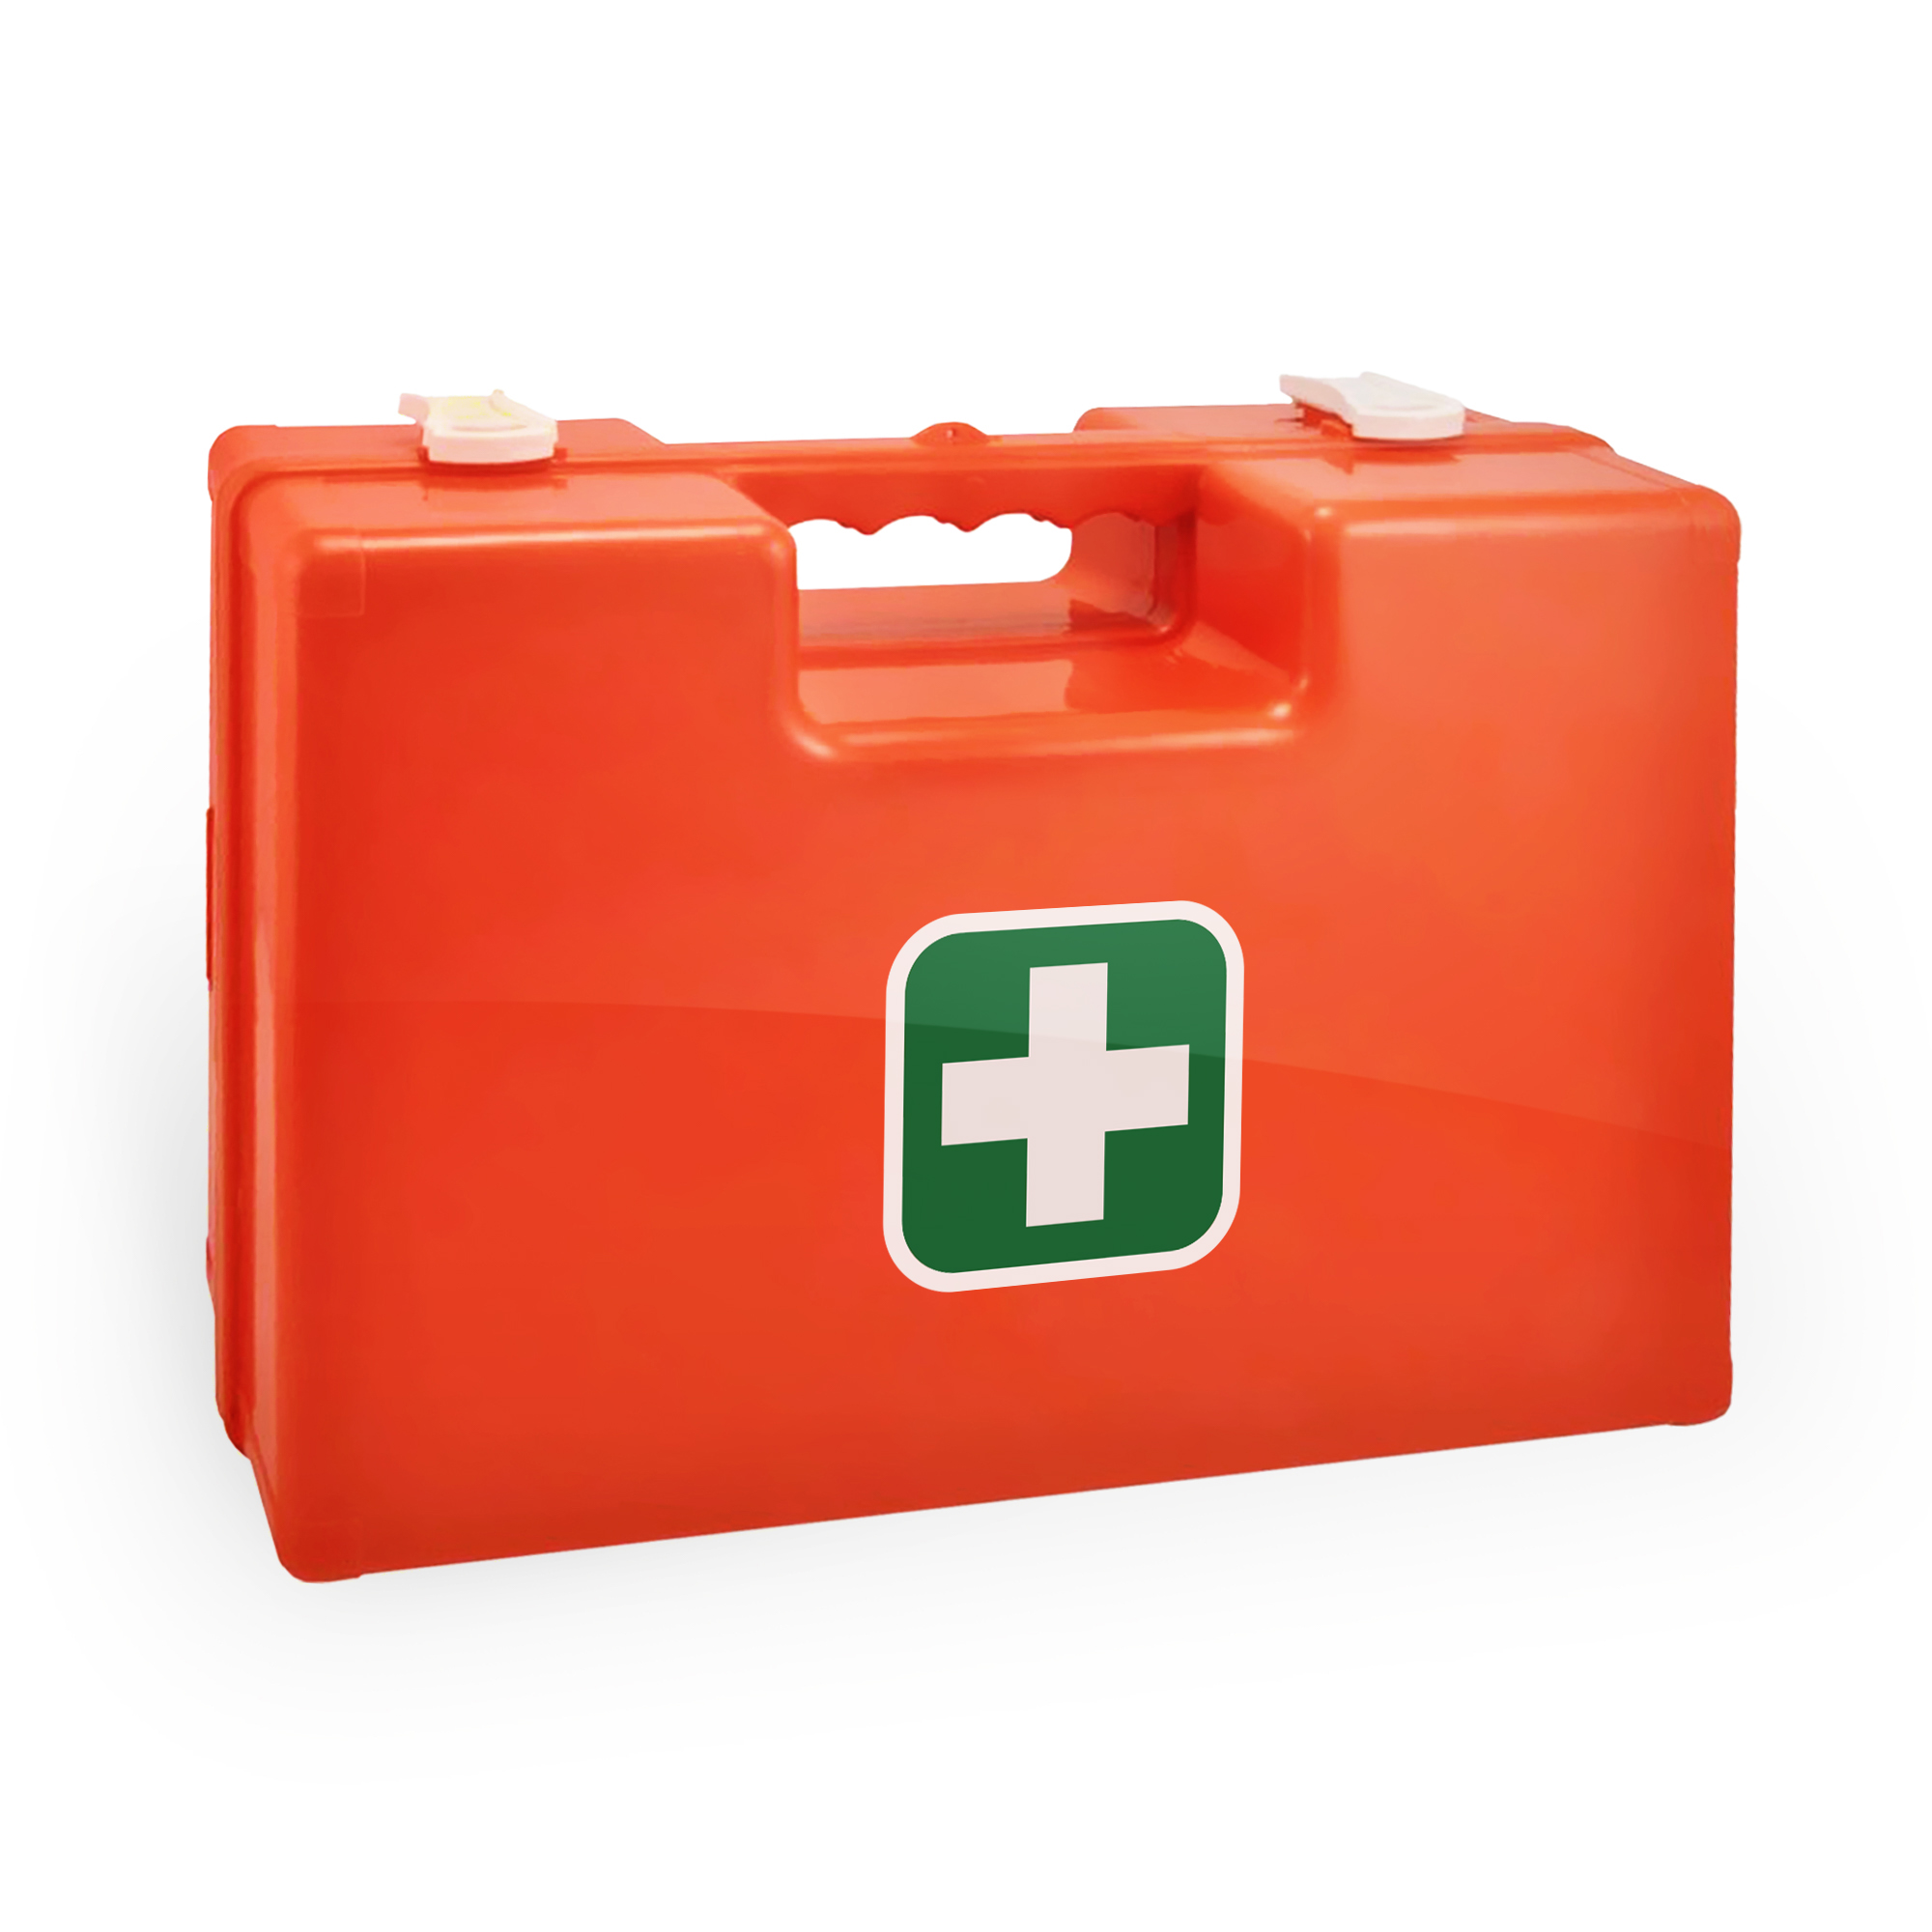 first aid cases, emergency cases, first aid kits